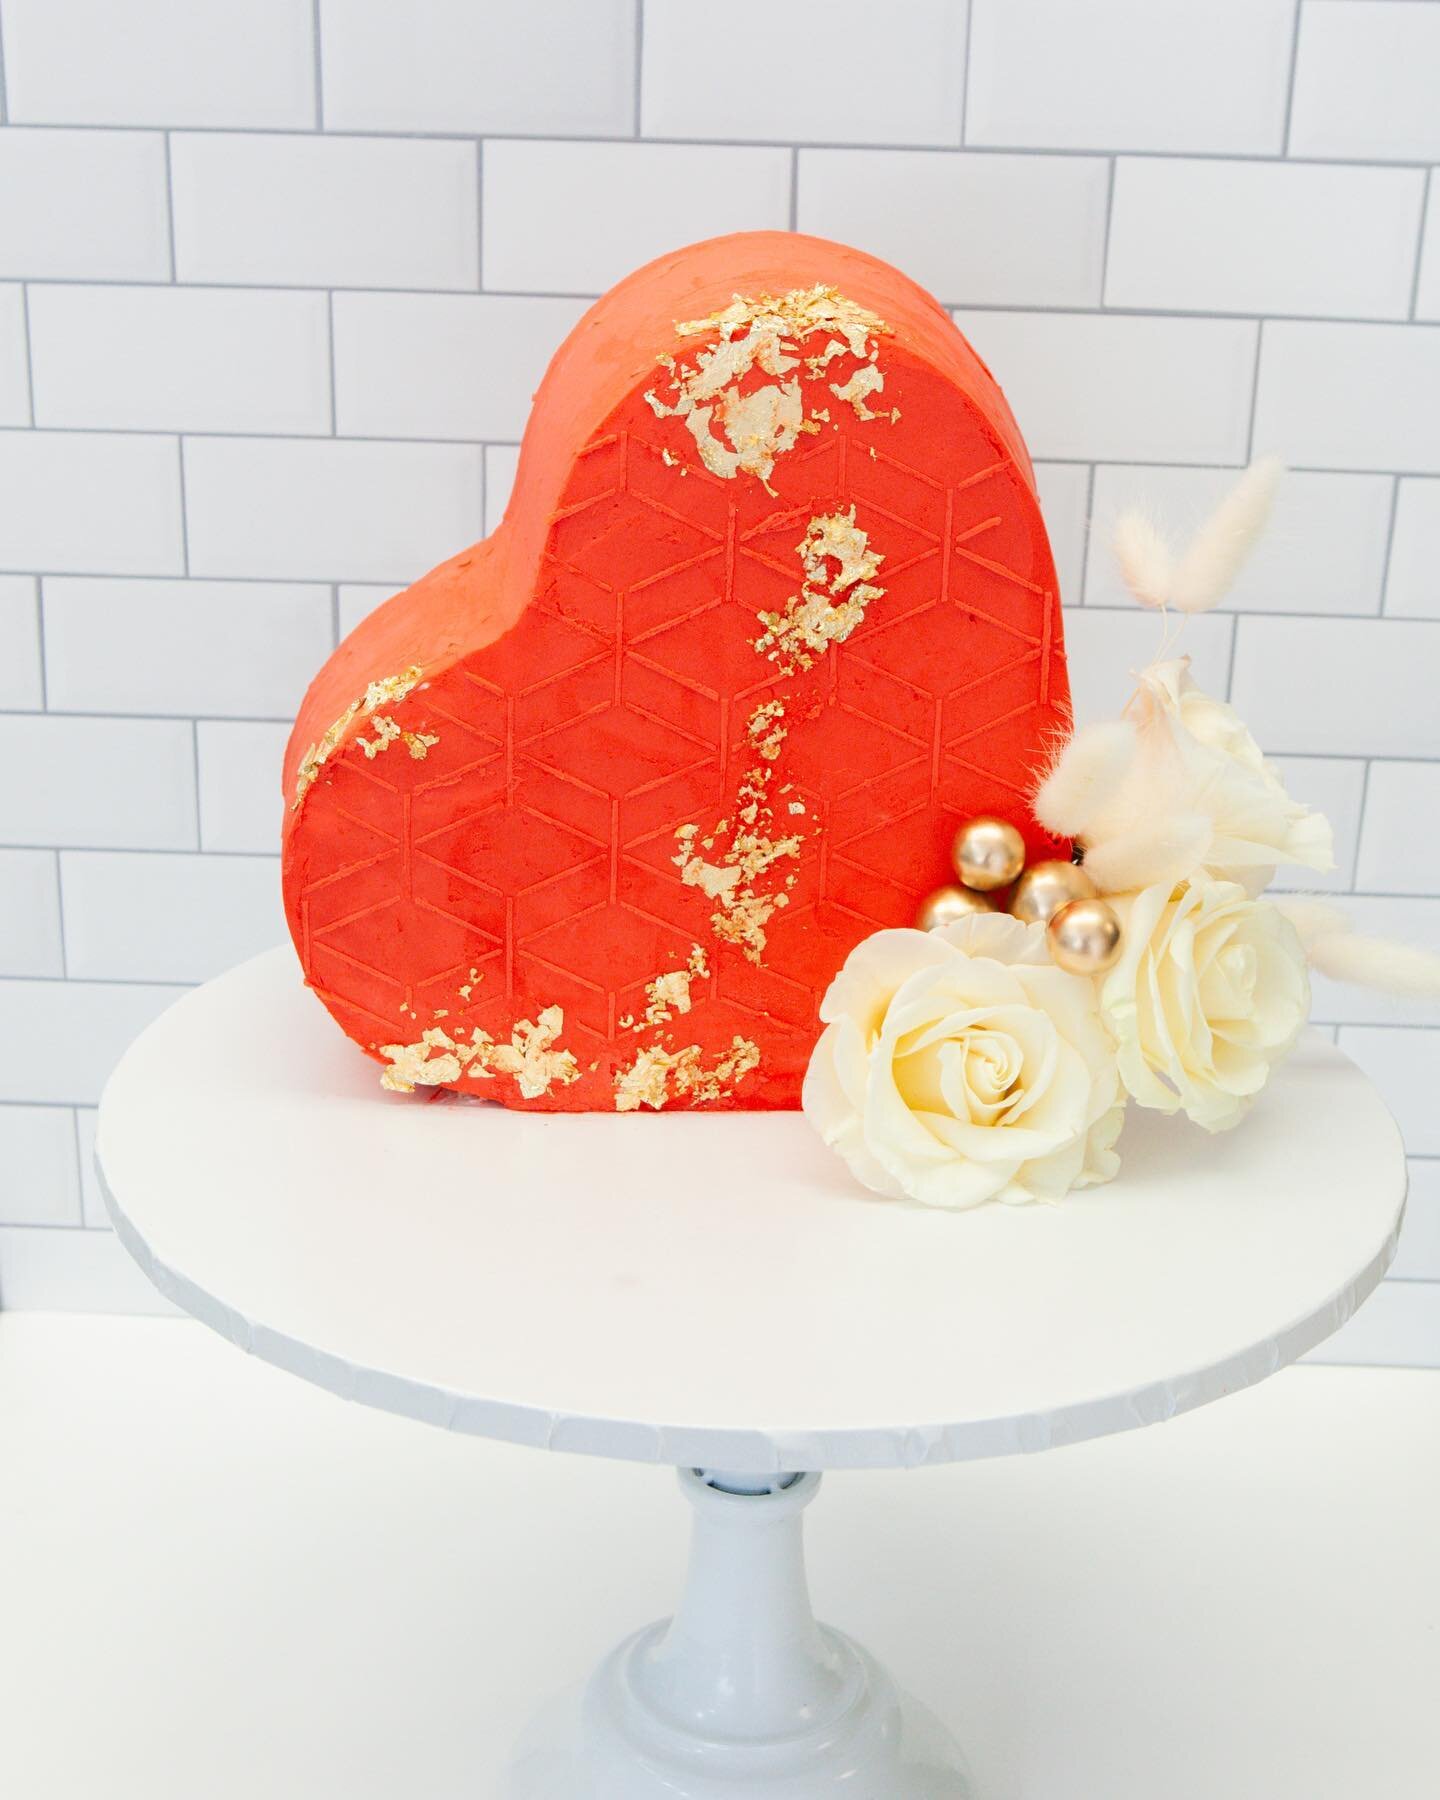 We call this design &lsquo;Love Drop&rsquo;! A masterpiece of elegance combining intricate geometric patterns and luscious fresh and dried florals, symbolizing the intertwined journey of love. Head to our shop page to order this cake and more for you